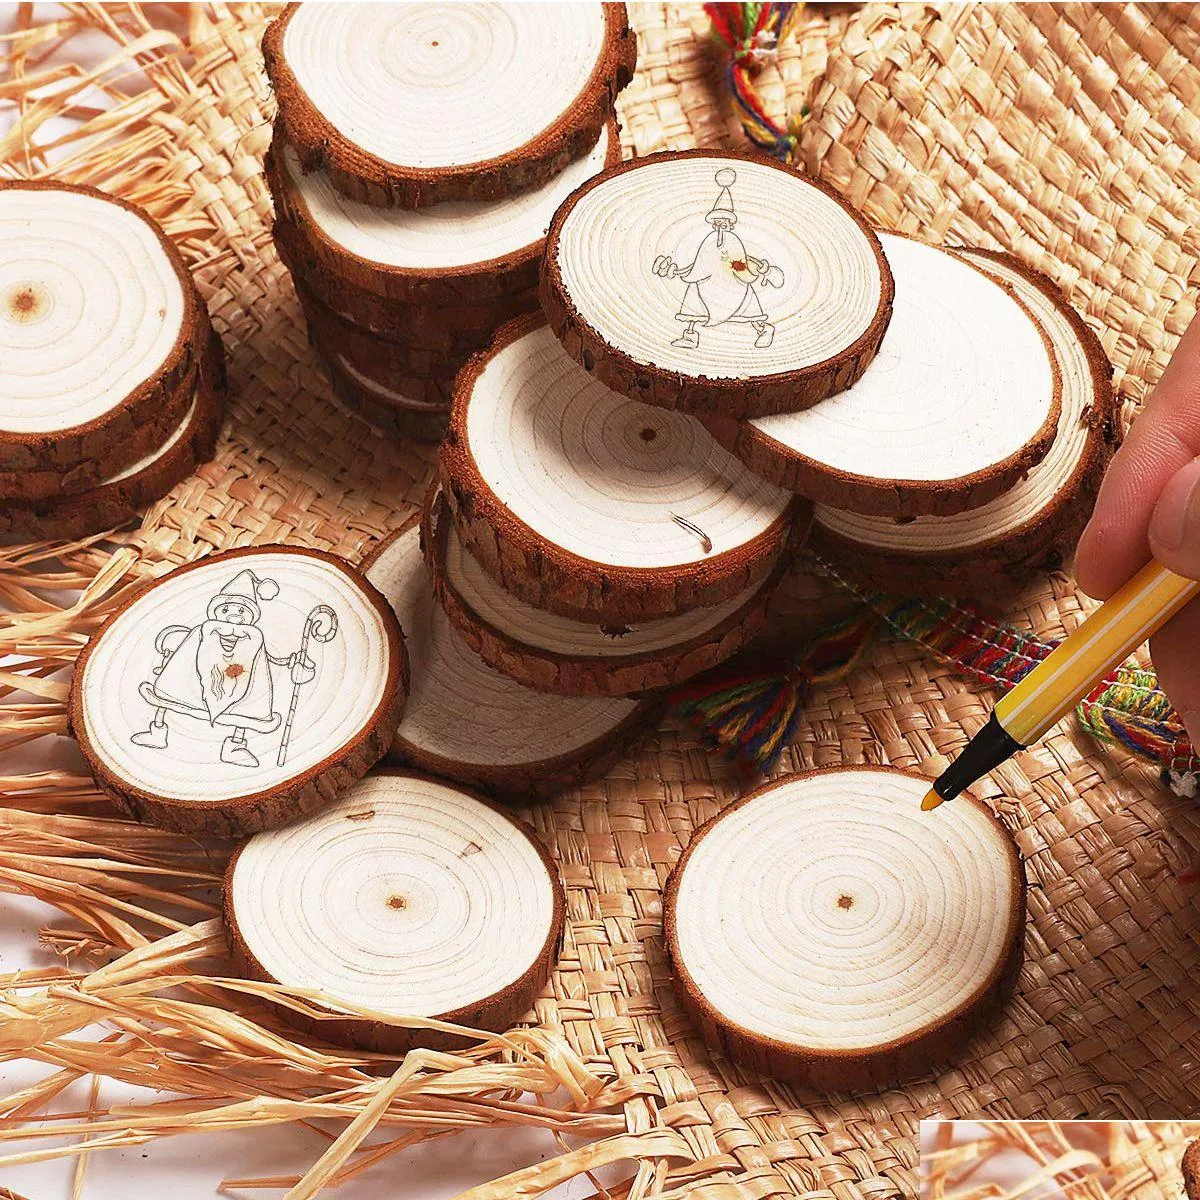 Pine Wood Slices 3 1/2 Round Wooden DIY Crafts For Christmas Ornaments  Dried 2/5 Thick Blank Unfinished Coasters DH9487 Drop D Dhomv Craft Tools  For Wood From Lybdehome, $0.17